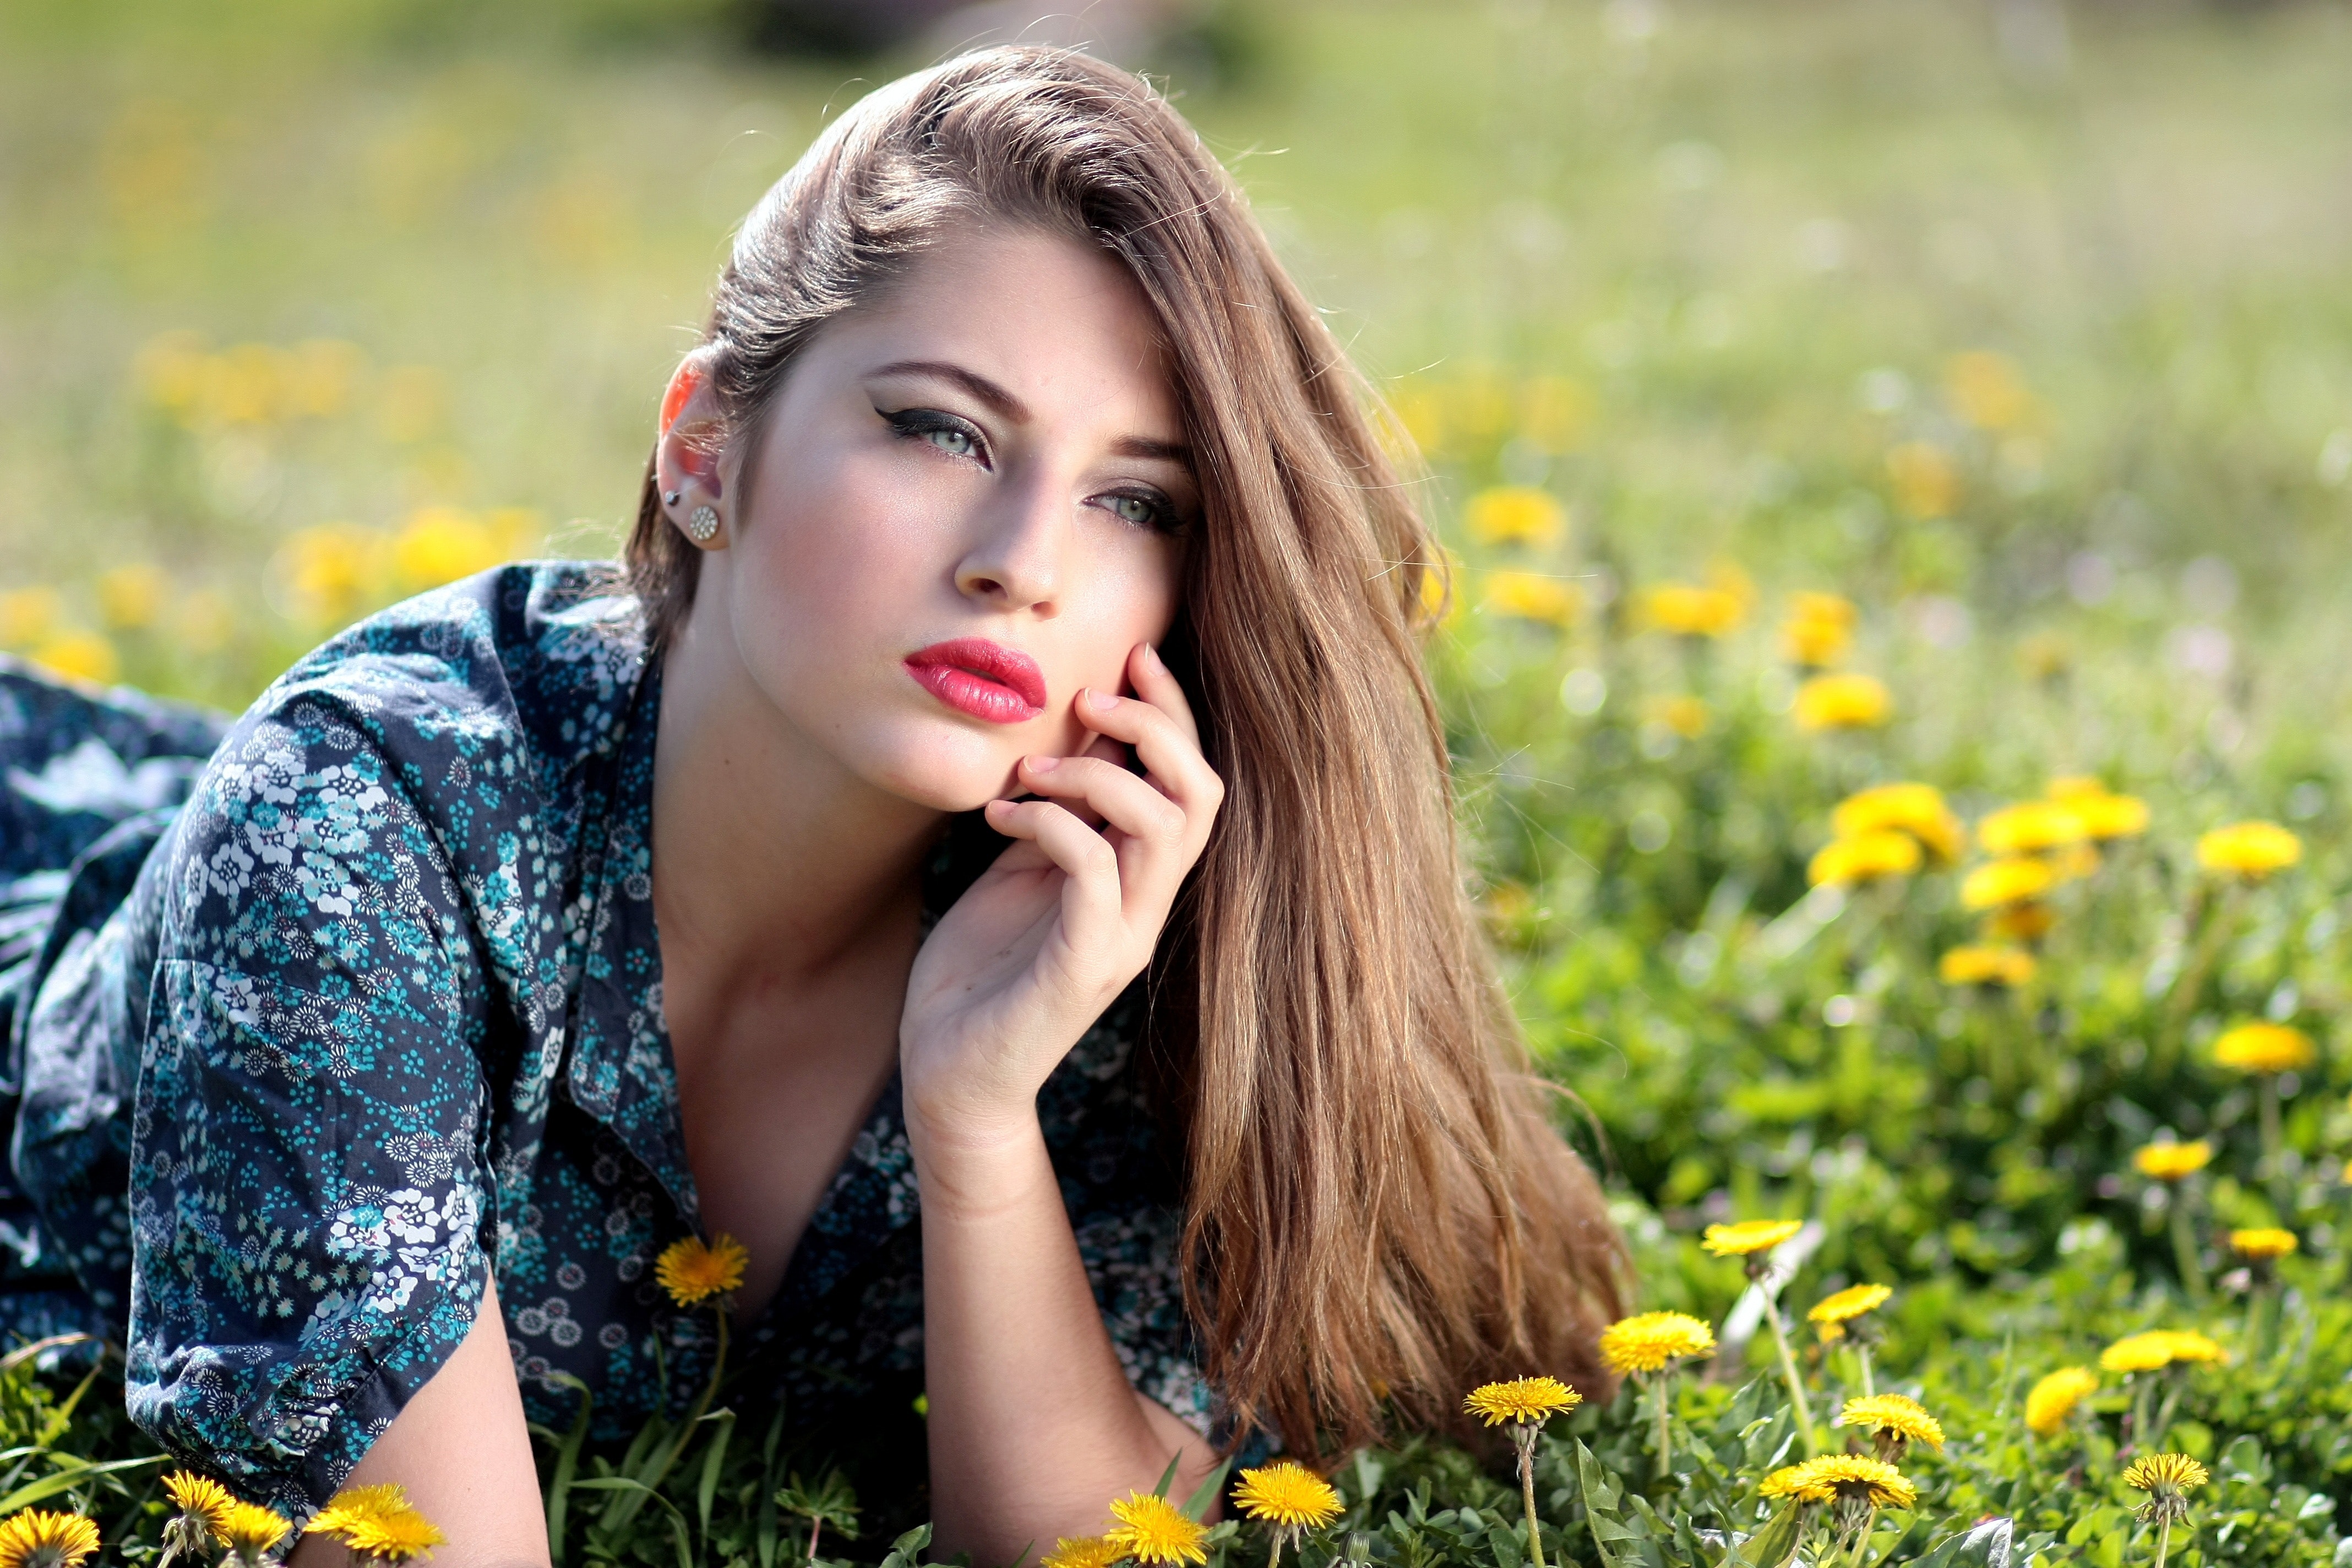 Girl Lying on Yellow Flower Field during Daytime.